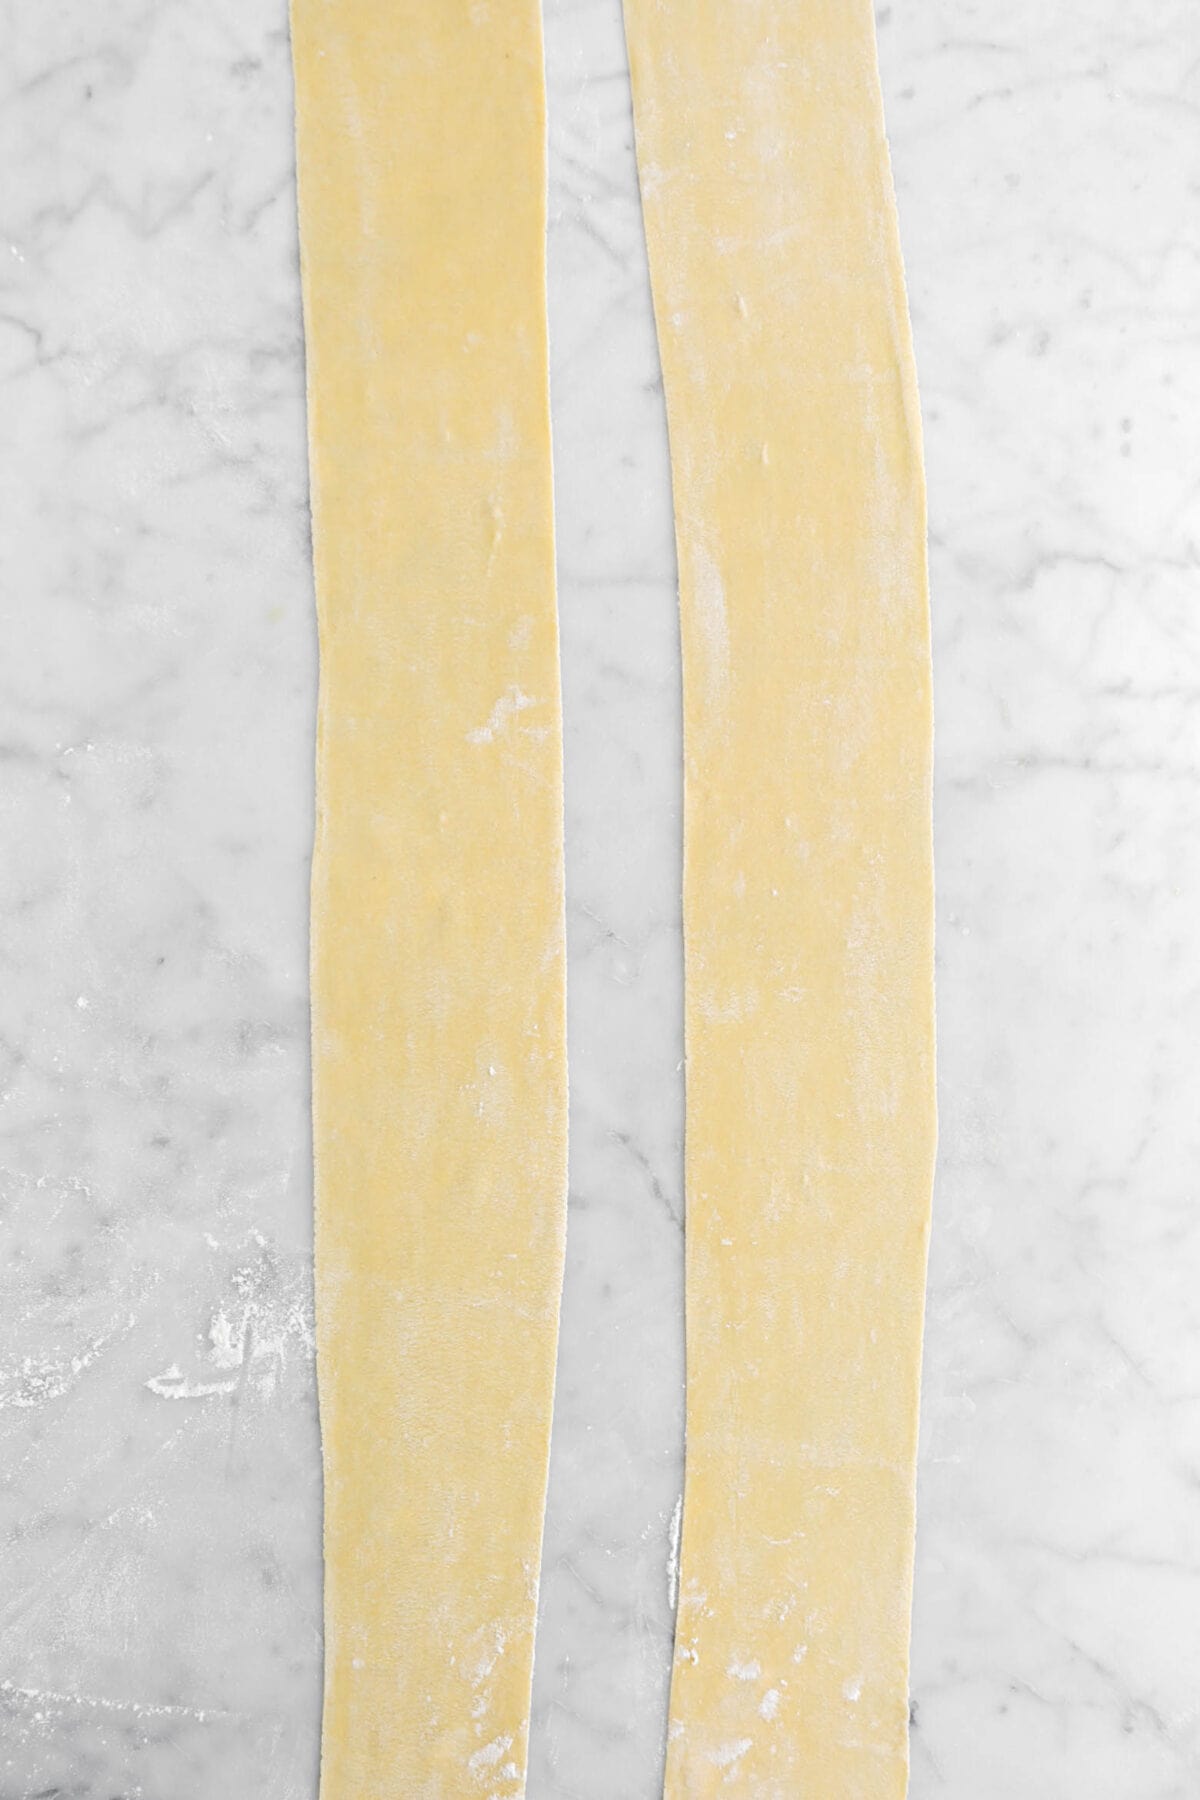 two sheets of pasta on marble surface.